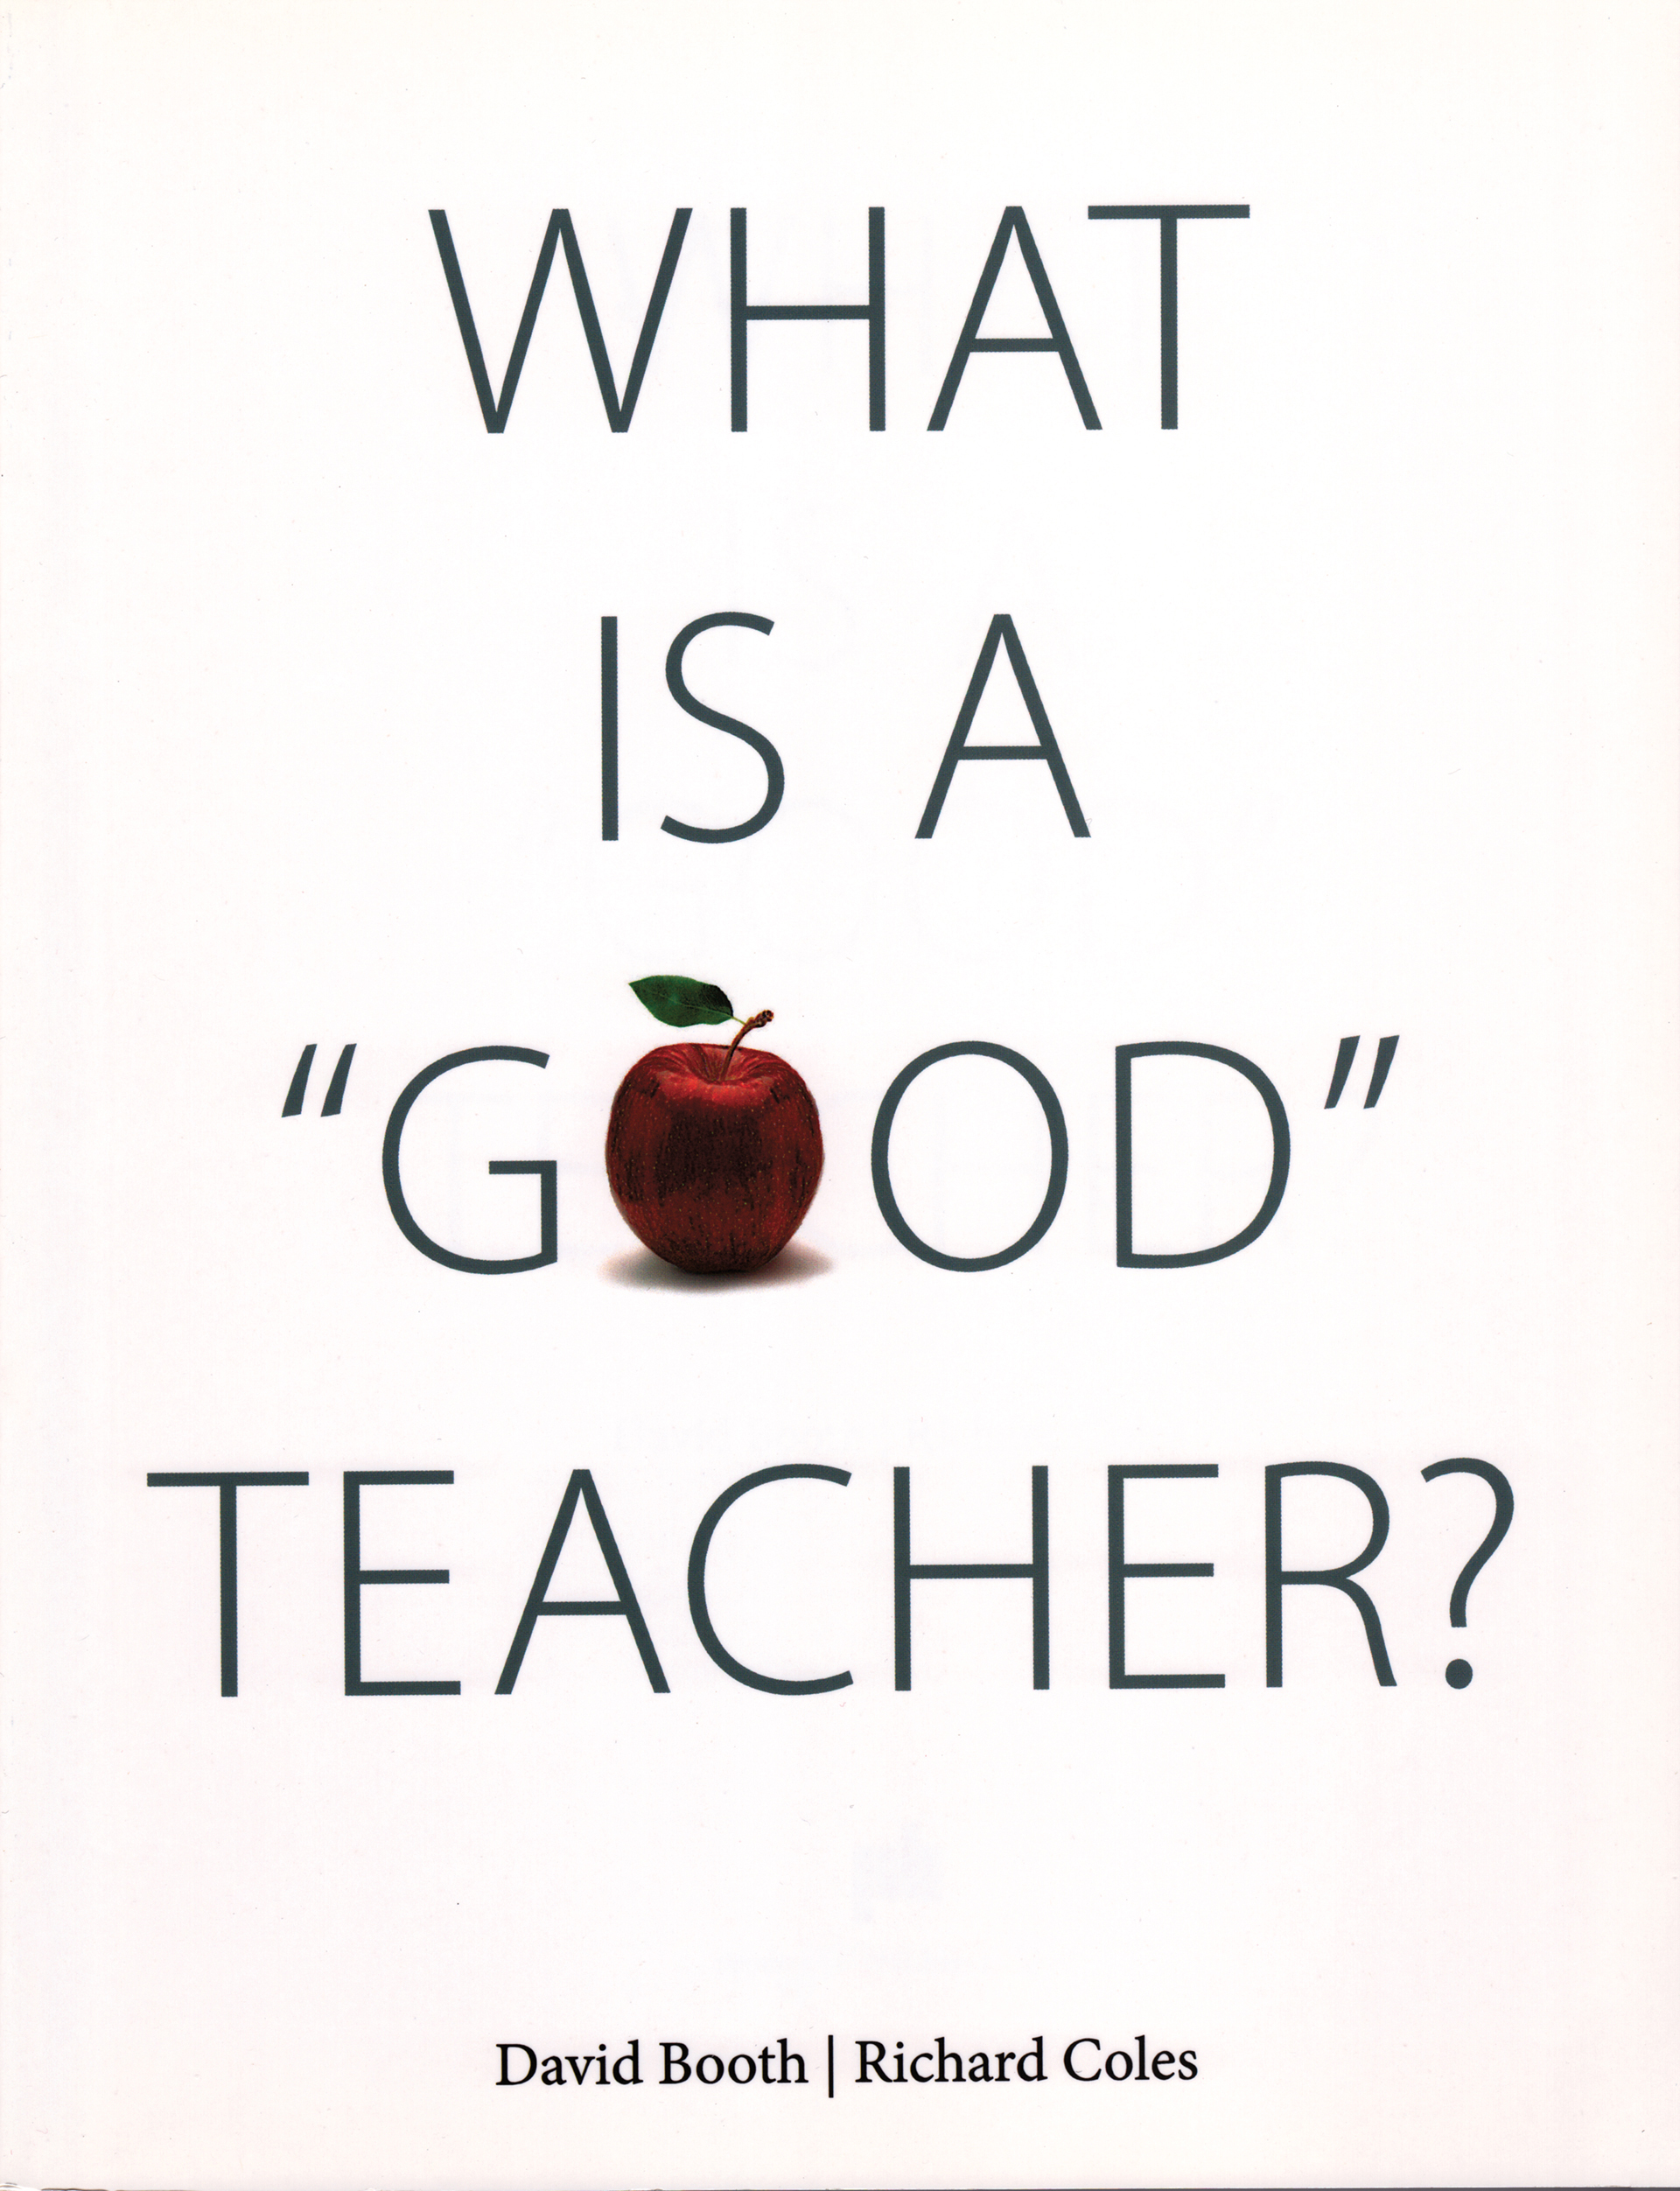 Book cover of 'What is a 'Good' Teacher?' The cover is of the book title with an apple replacing the first o in the word 'good.'